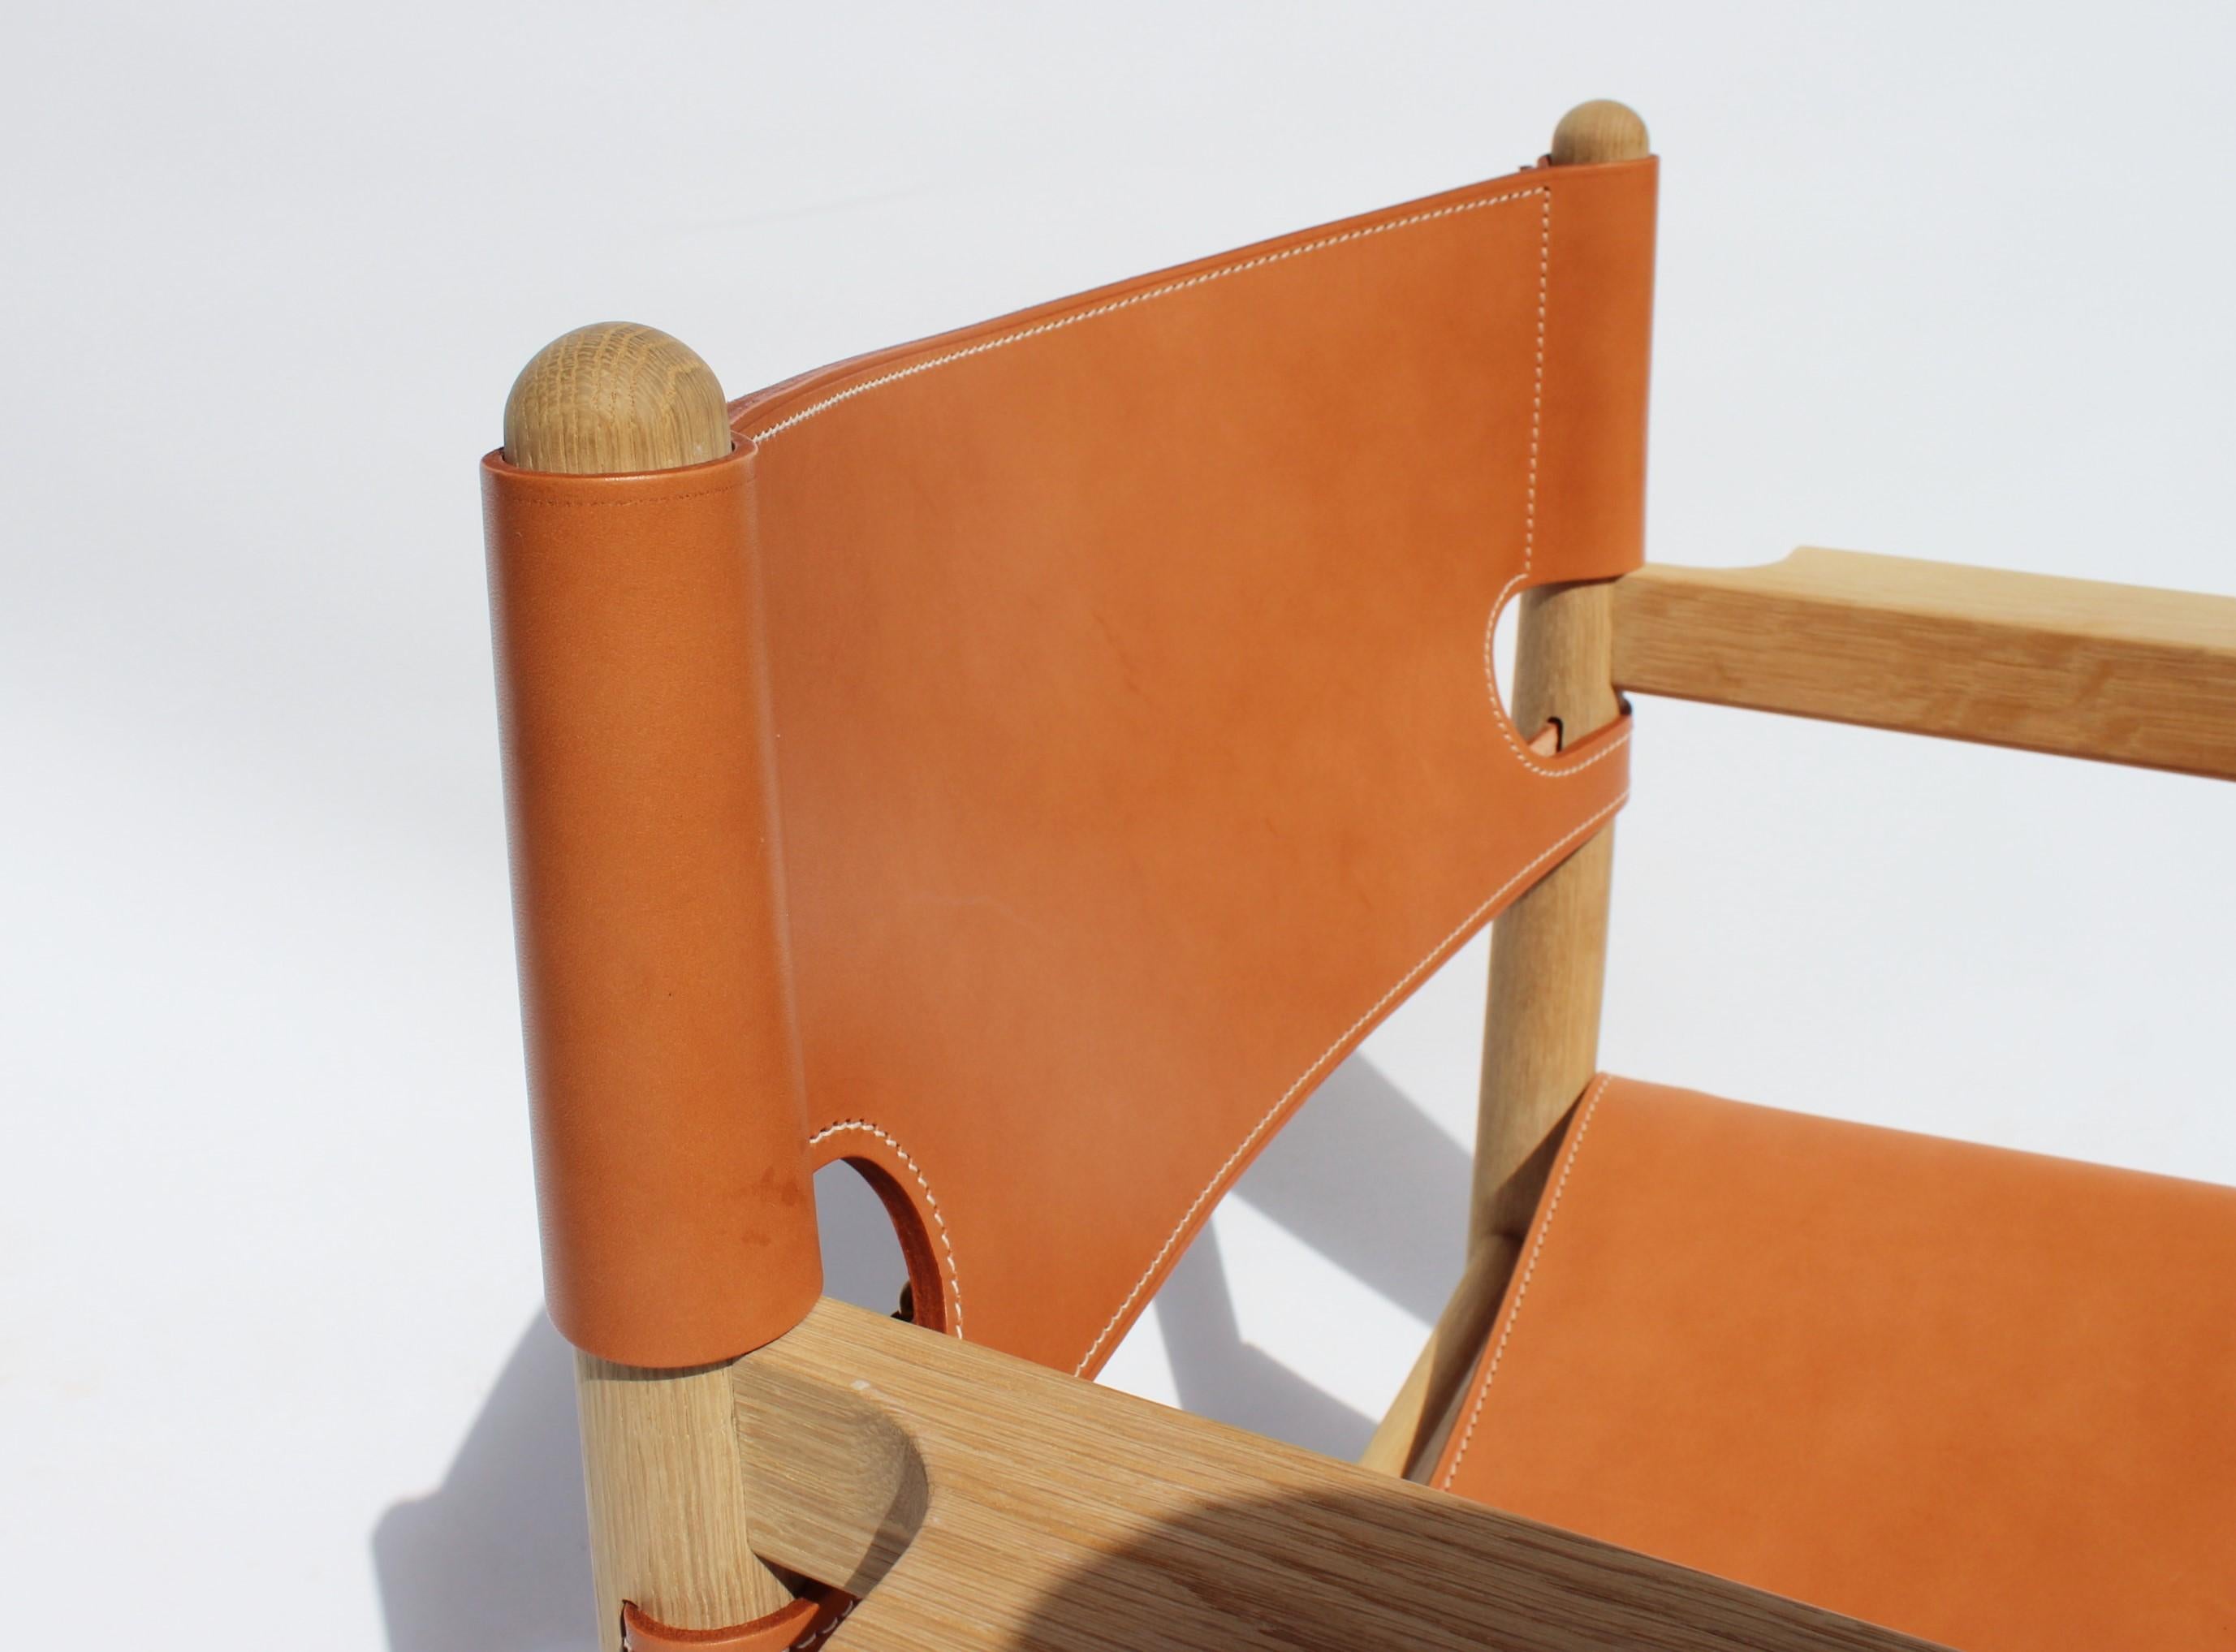 The Spanish dining chair with armrests, model 3238, designed by Børge Mogensen and manufactured by Fredericia Furniture in 2019. The chair is of oak and cognac leather.